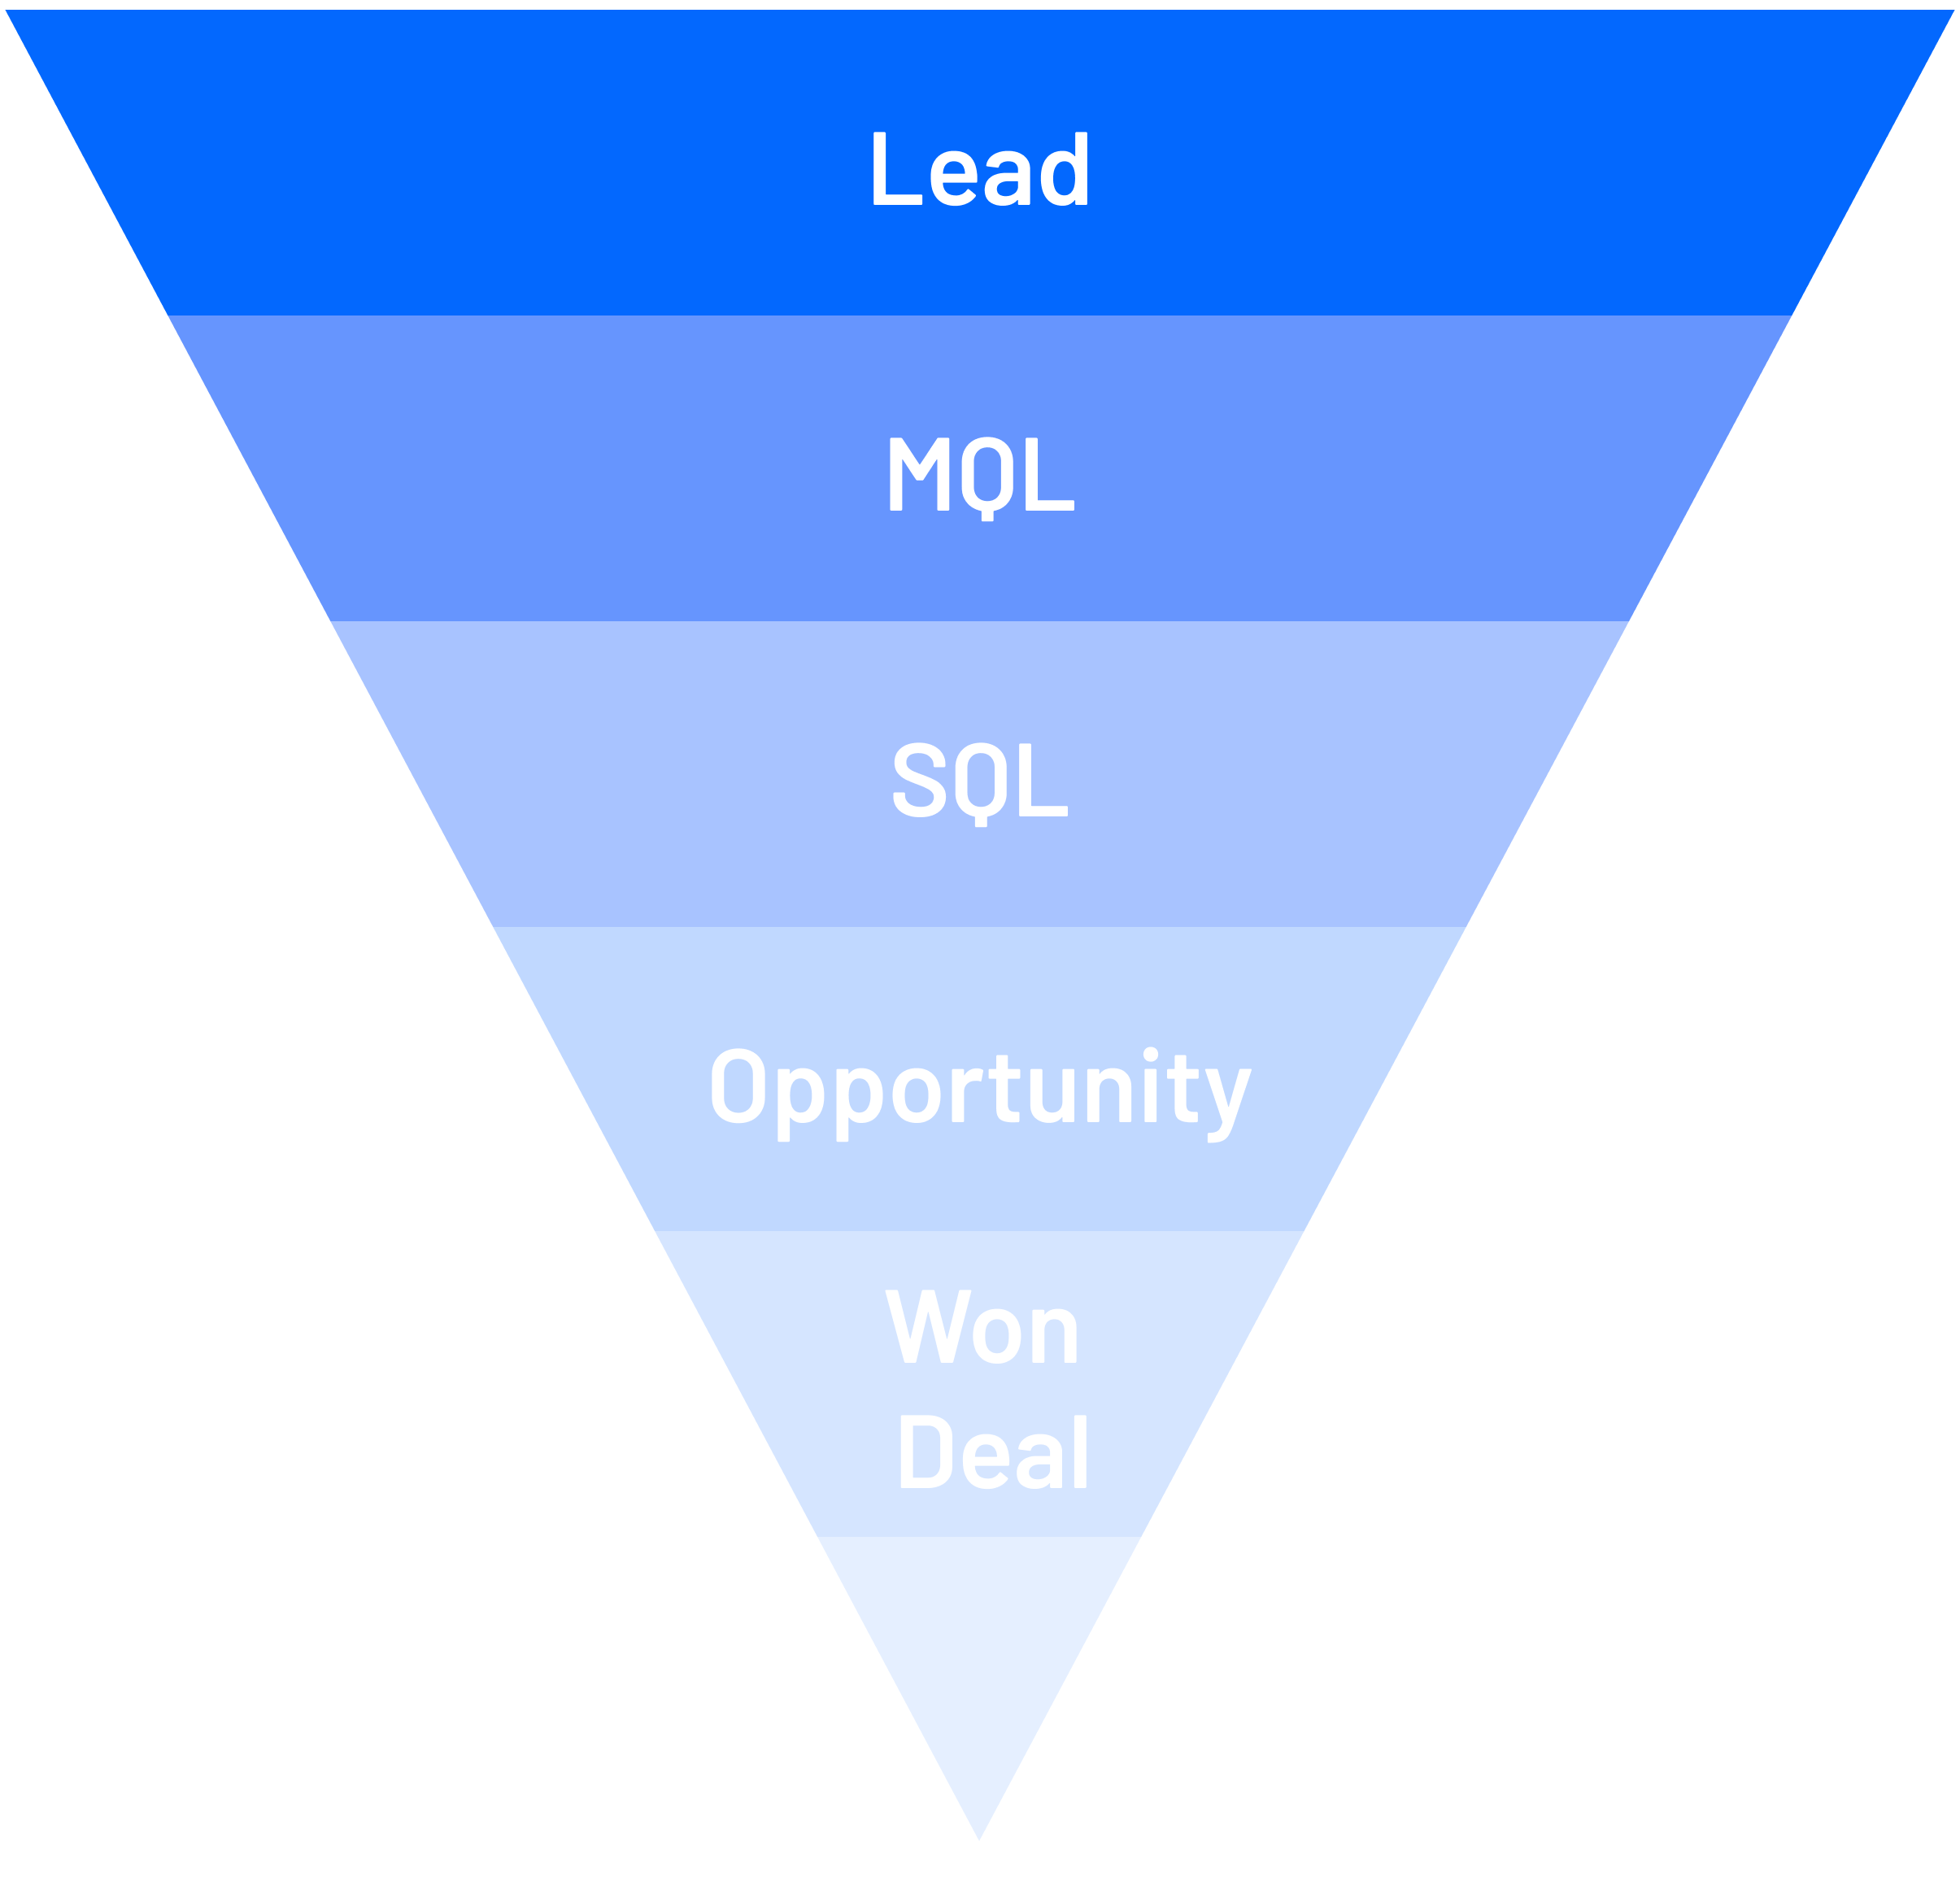 The sales and marketing funnel from lead to MQL to SQL to Opportunity to Closed Deal.